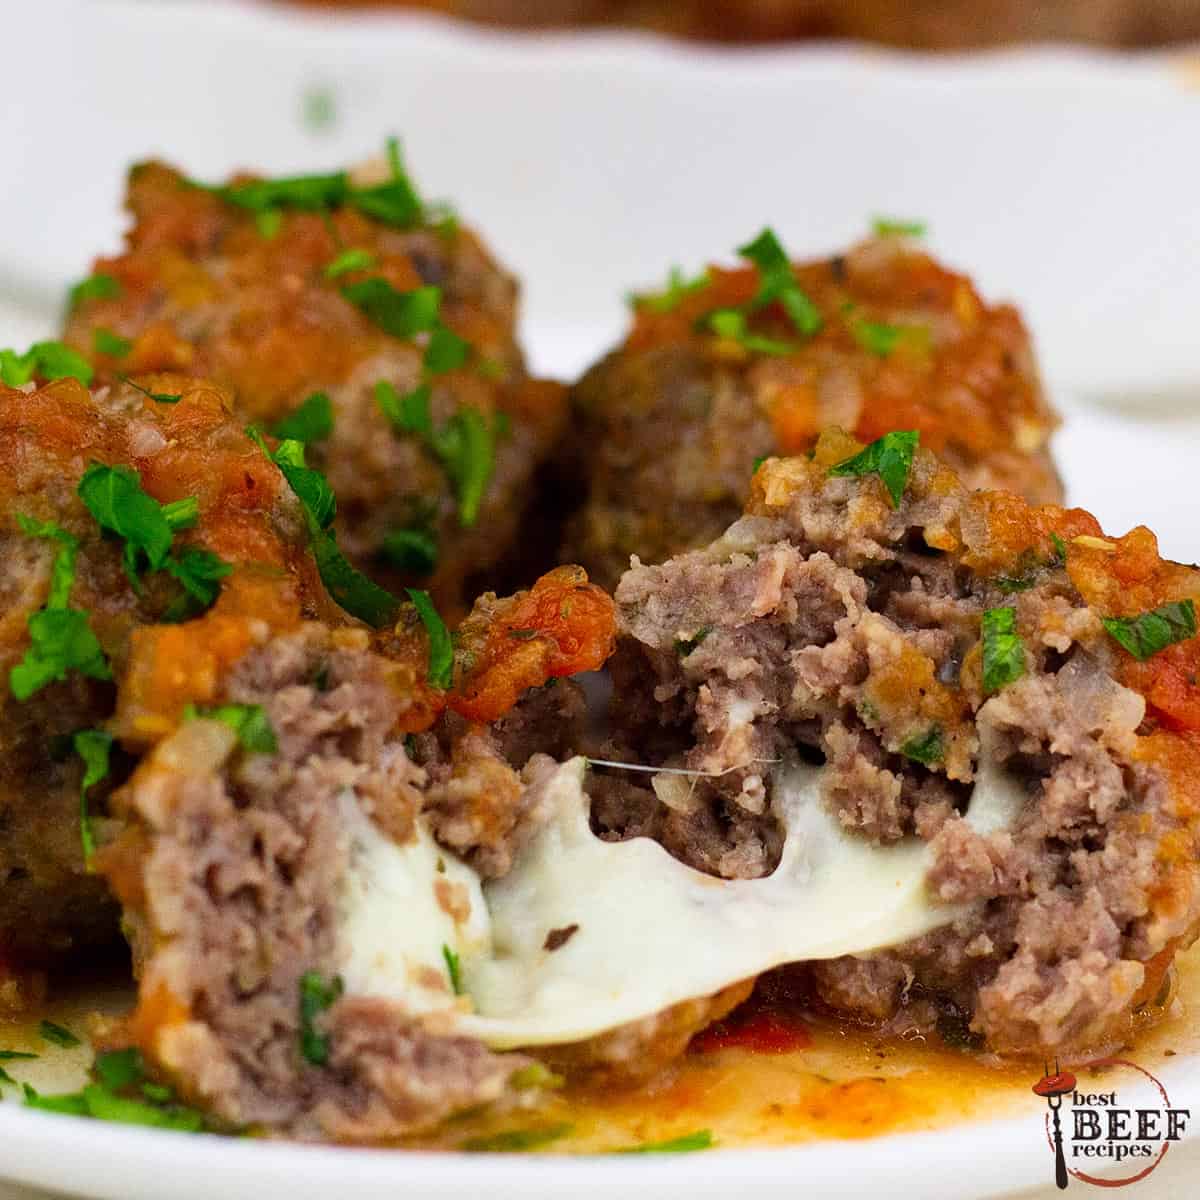 a closeup of a mozzarella stuffed meatball cut in half with mozzarella melted between the two halves, on a plate with more meatballs